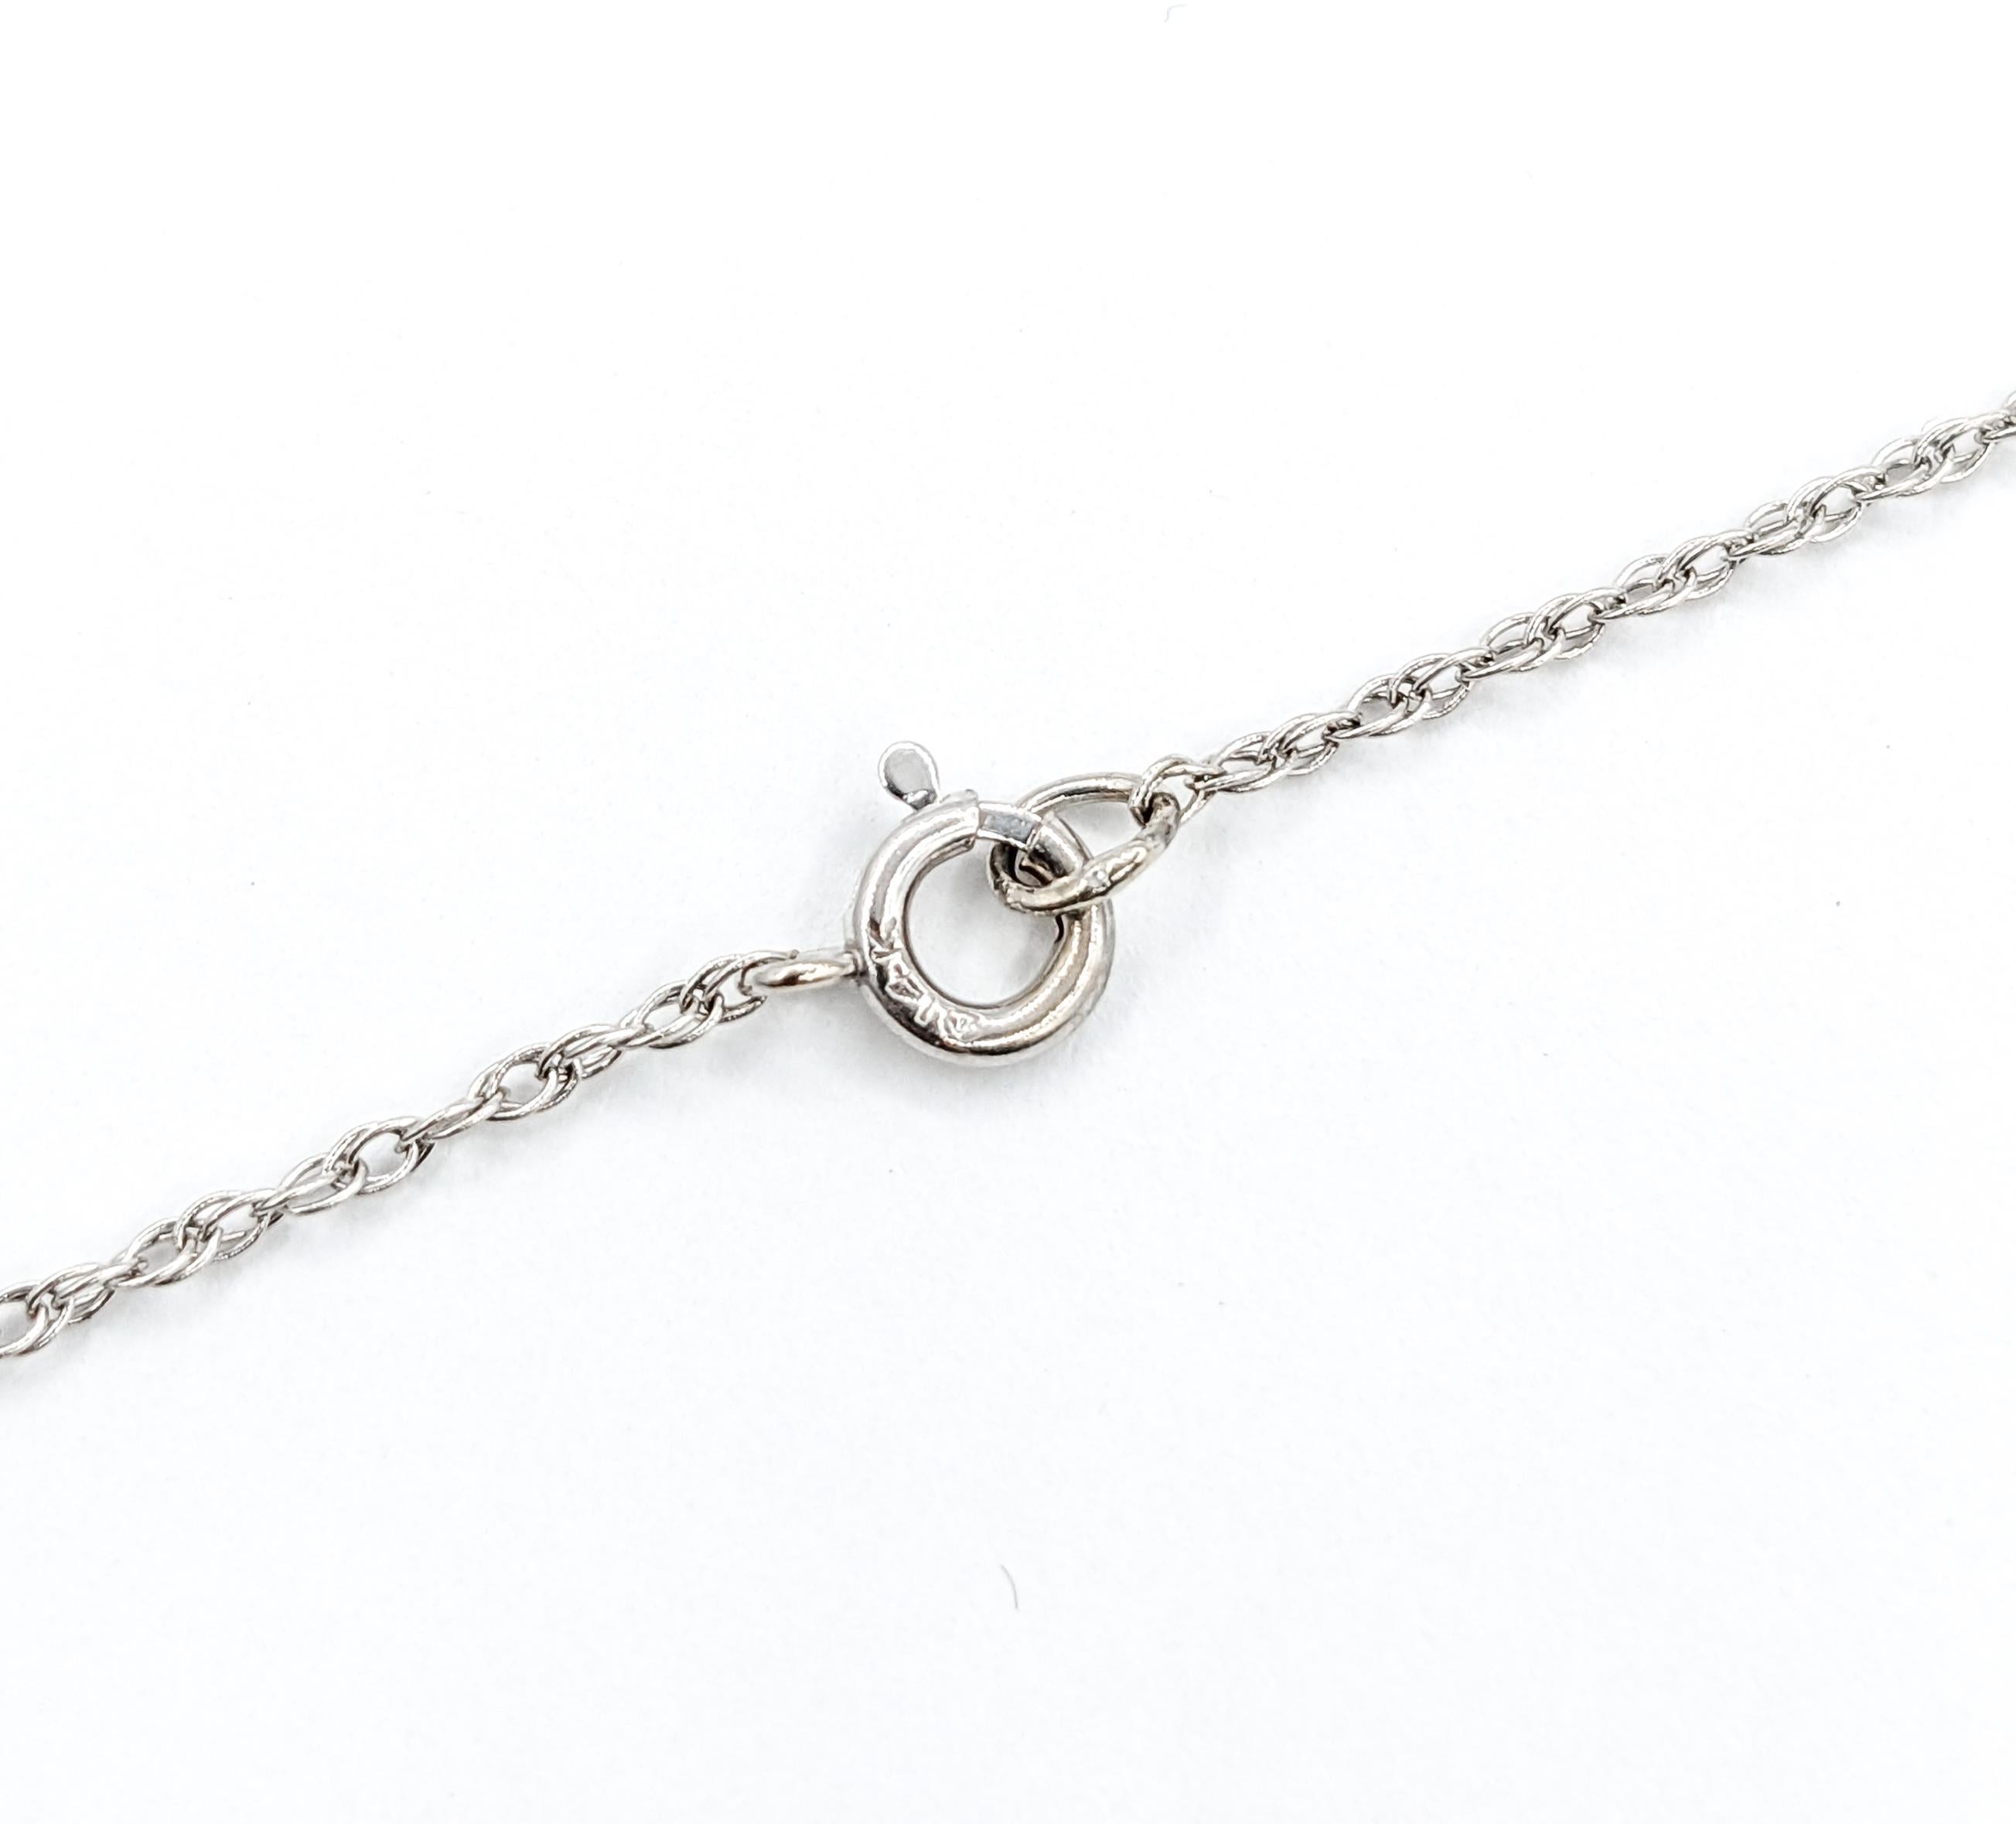 Feminine .75ctw Diamond Heart Pendant Necklace in White Gold

Introducing our stunning heart necklace, a symbol of love and elegance, masterfully crafted in 14k white gold. This exquisite necklace showcases a .55ct pear cut diamond, in a I clarity